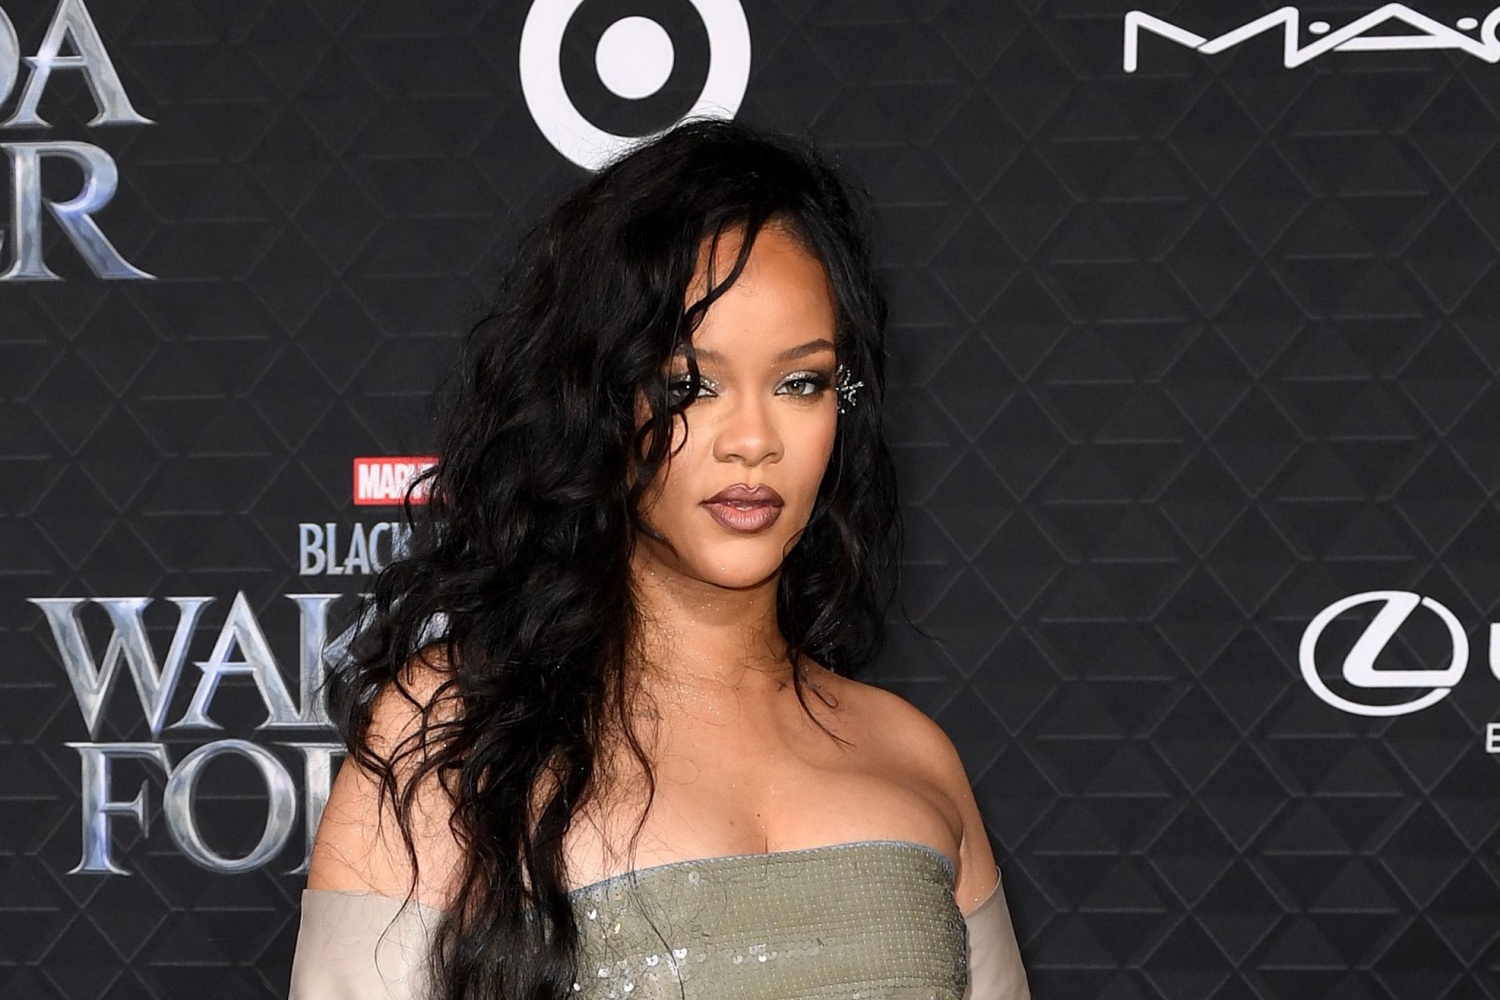 Rihanna Can't Wait To 'Kill' Comeback Stage at Super Bowl Halftime Show After Long Break